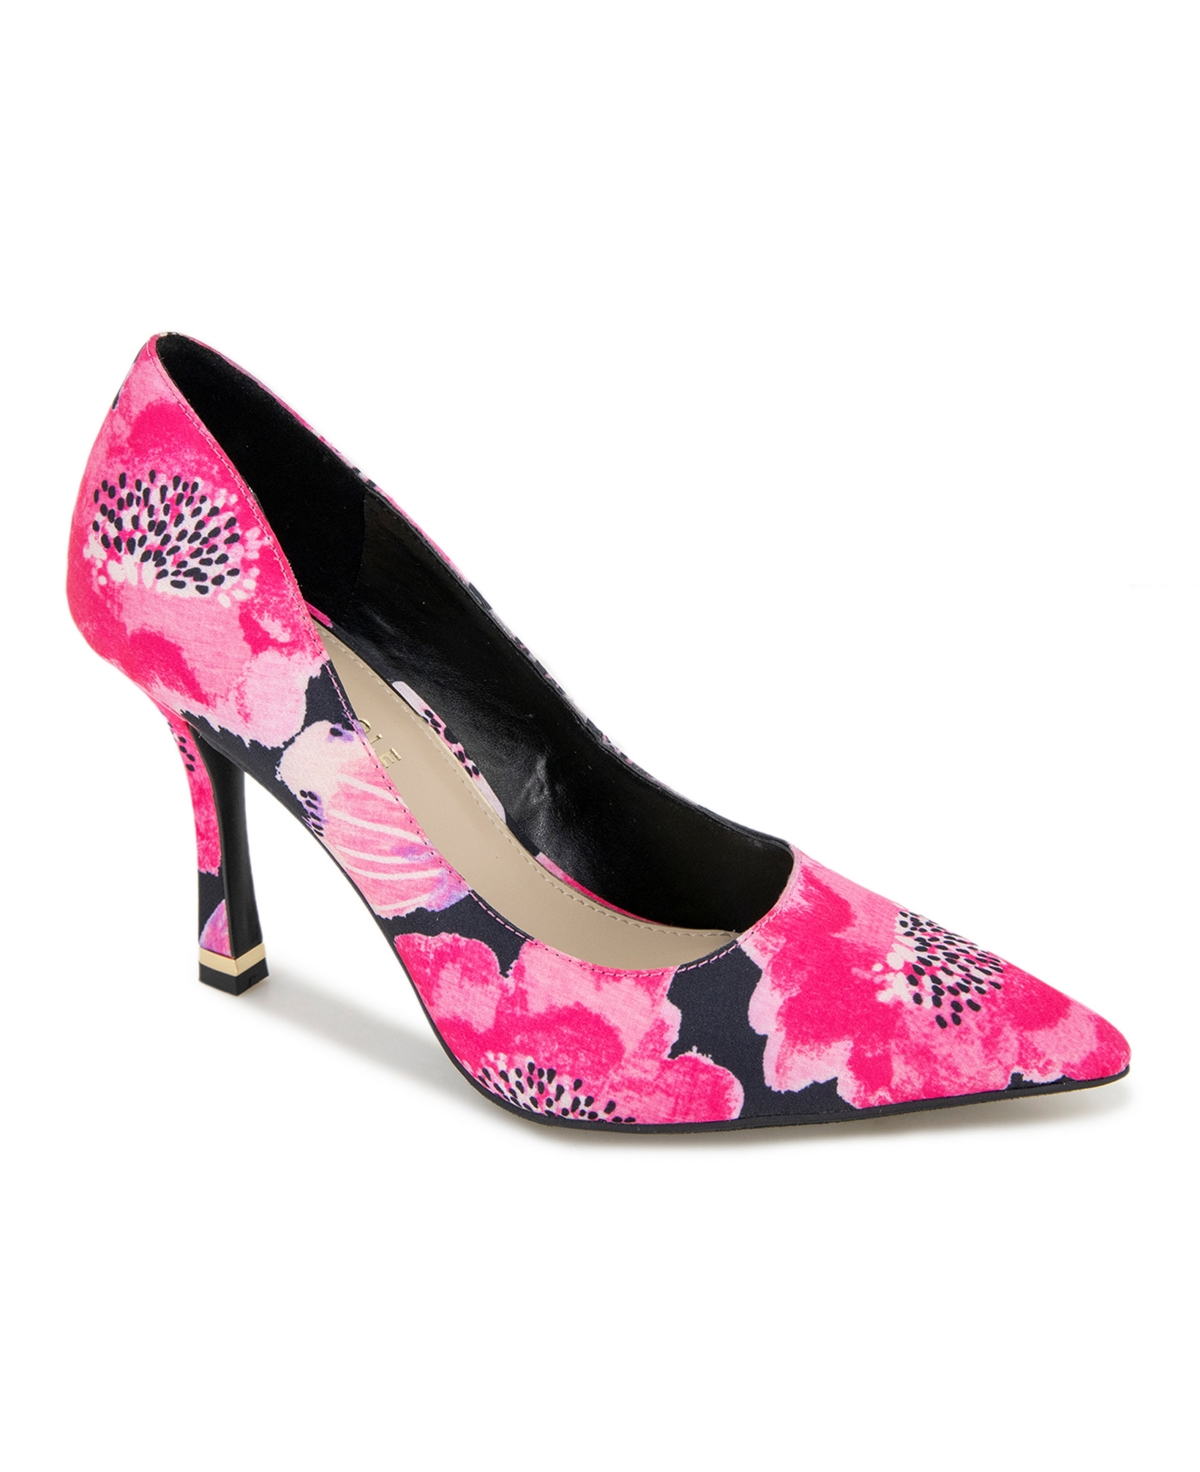 Kenneth Cole New York Women's Romi Pumps In Black,pink Floral- Textile